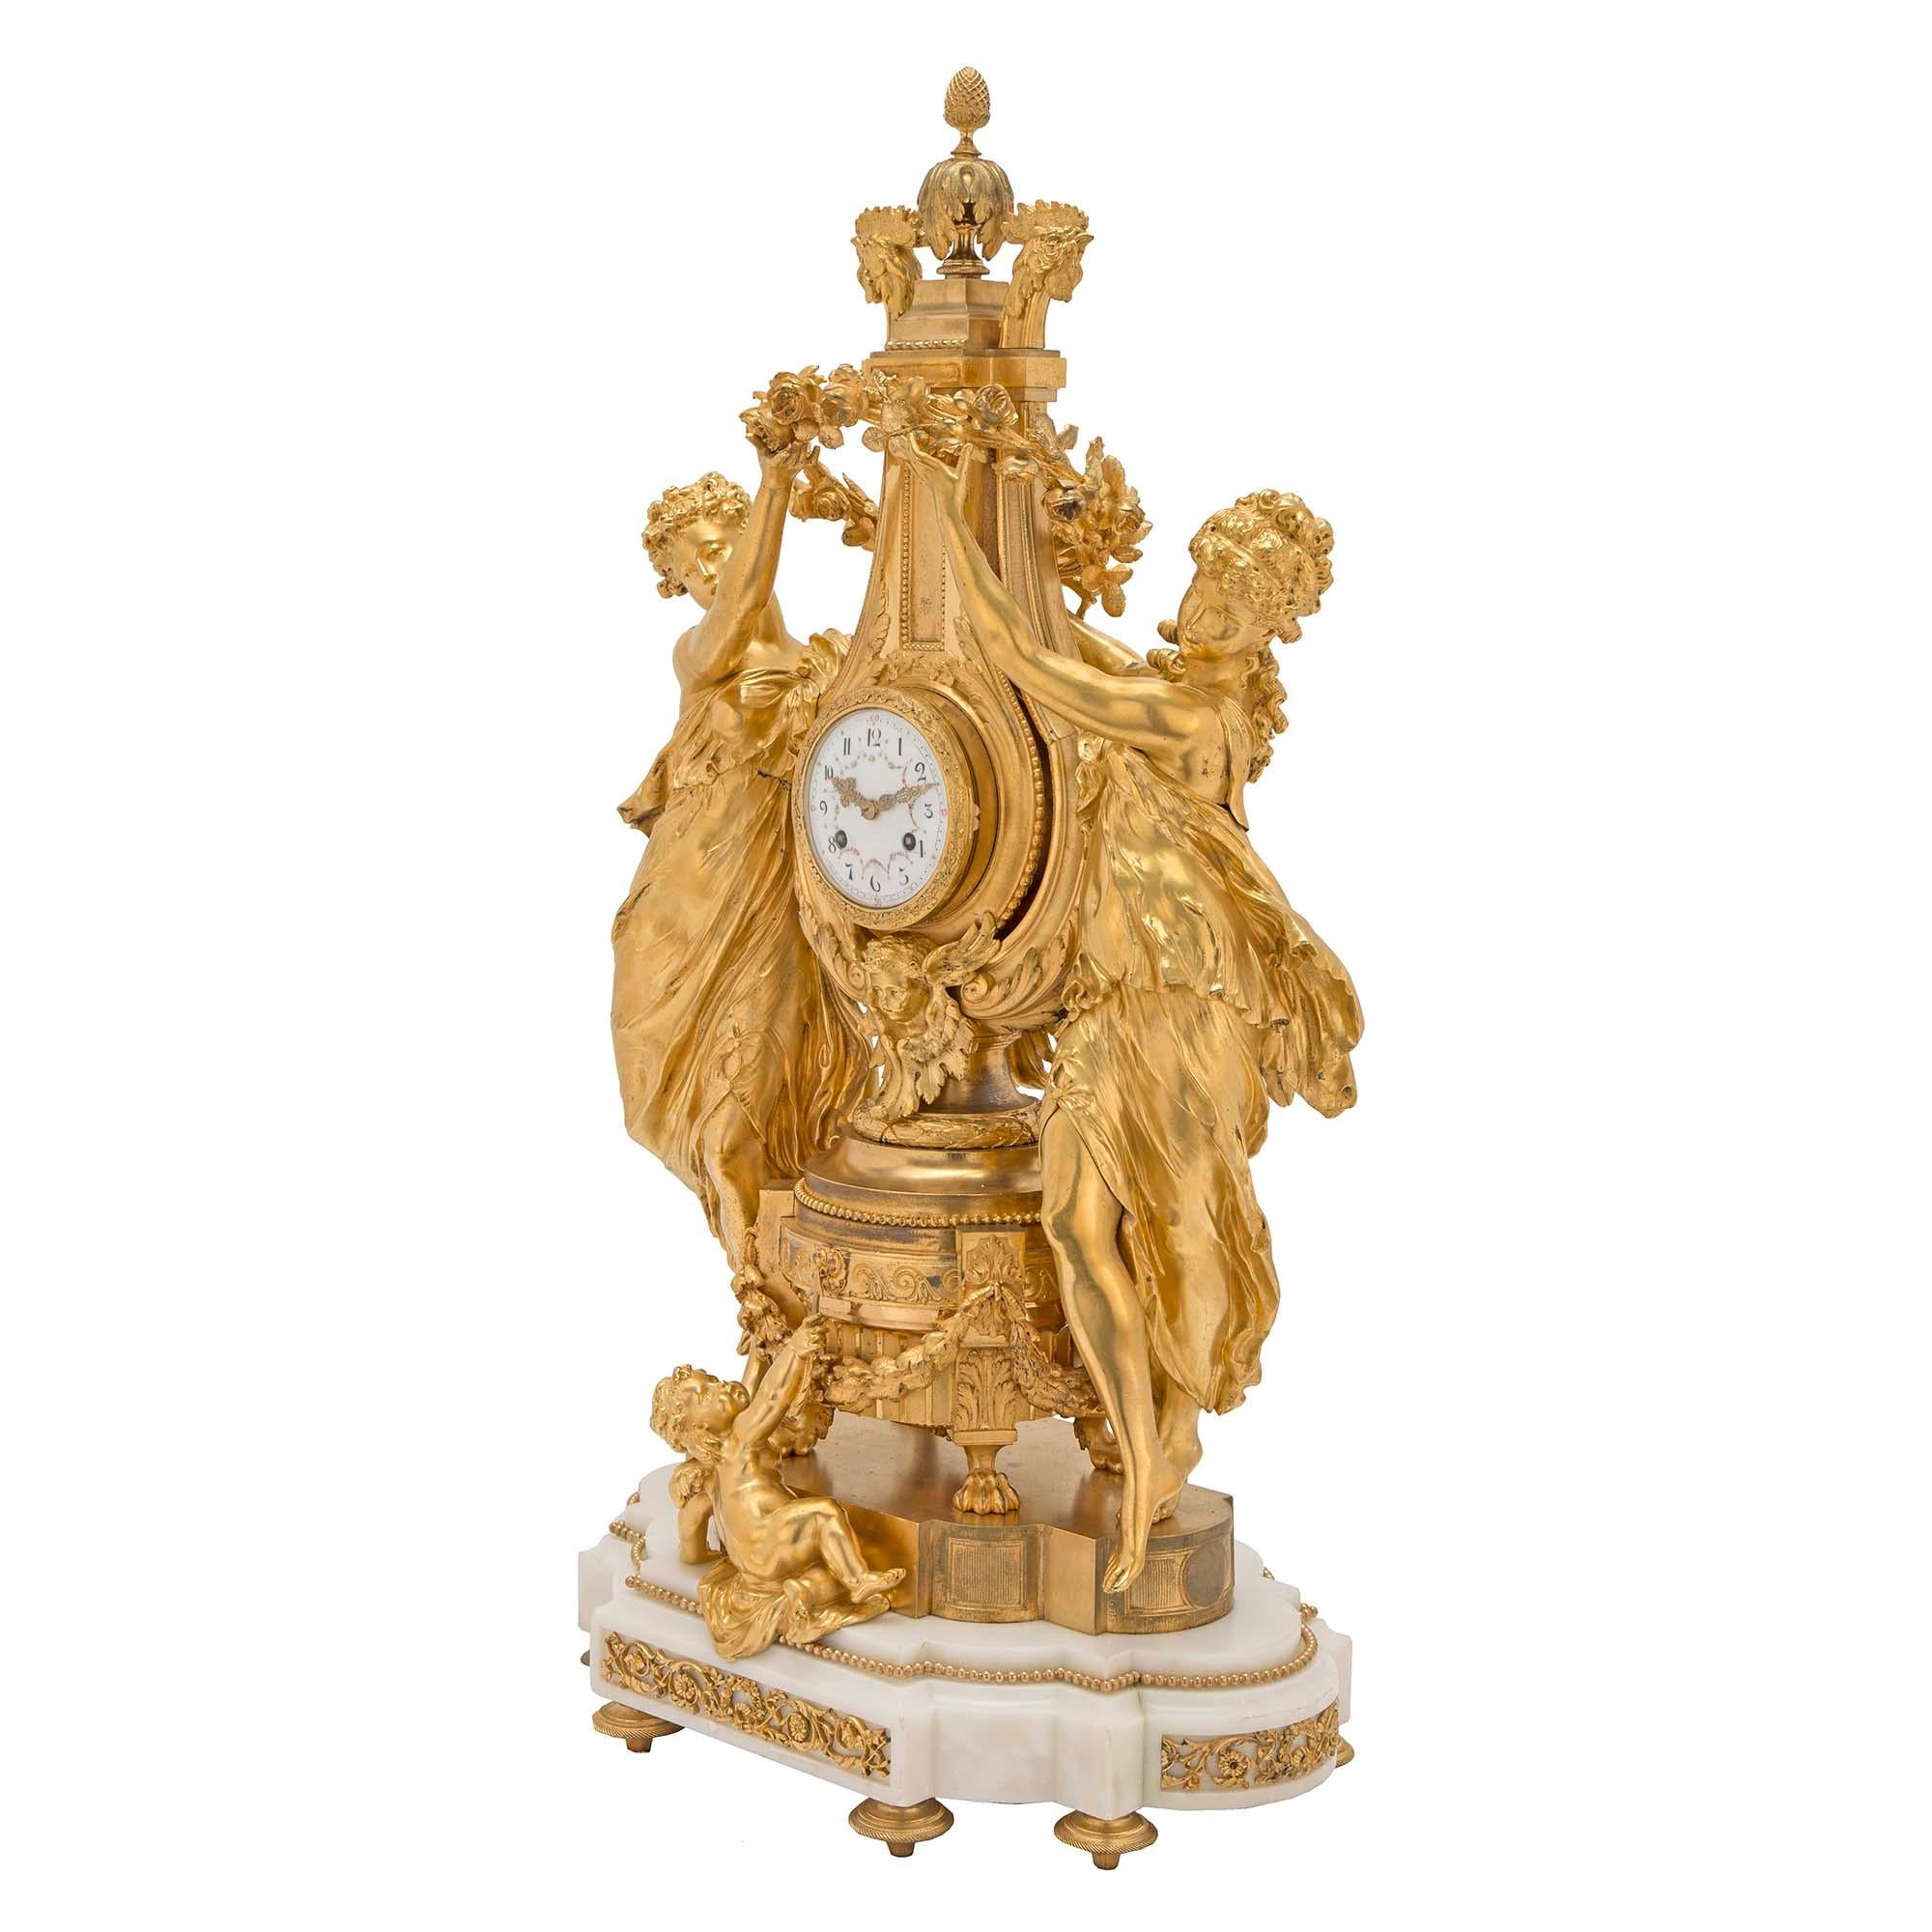 A magnificent and very high quality French 19th century Louis XVI st. marble and finely chased ormolu clock. The clock is raised on six ormolu topie shaped feet below the white Carrara marble base with scrolled foliate ormolu mounts and beaded